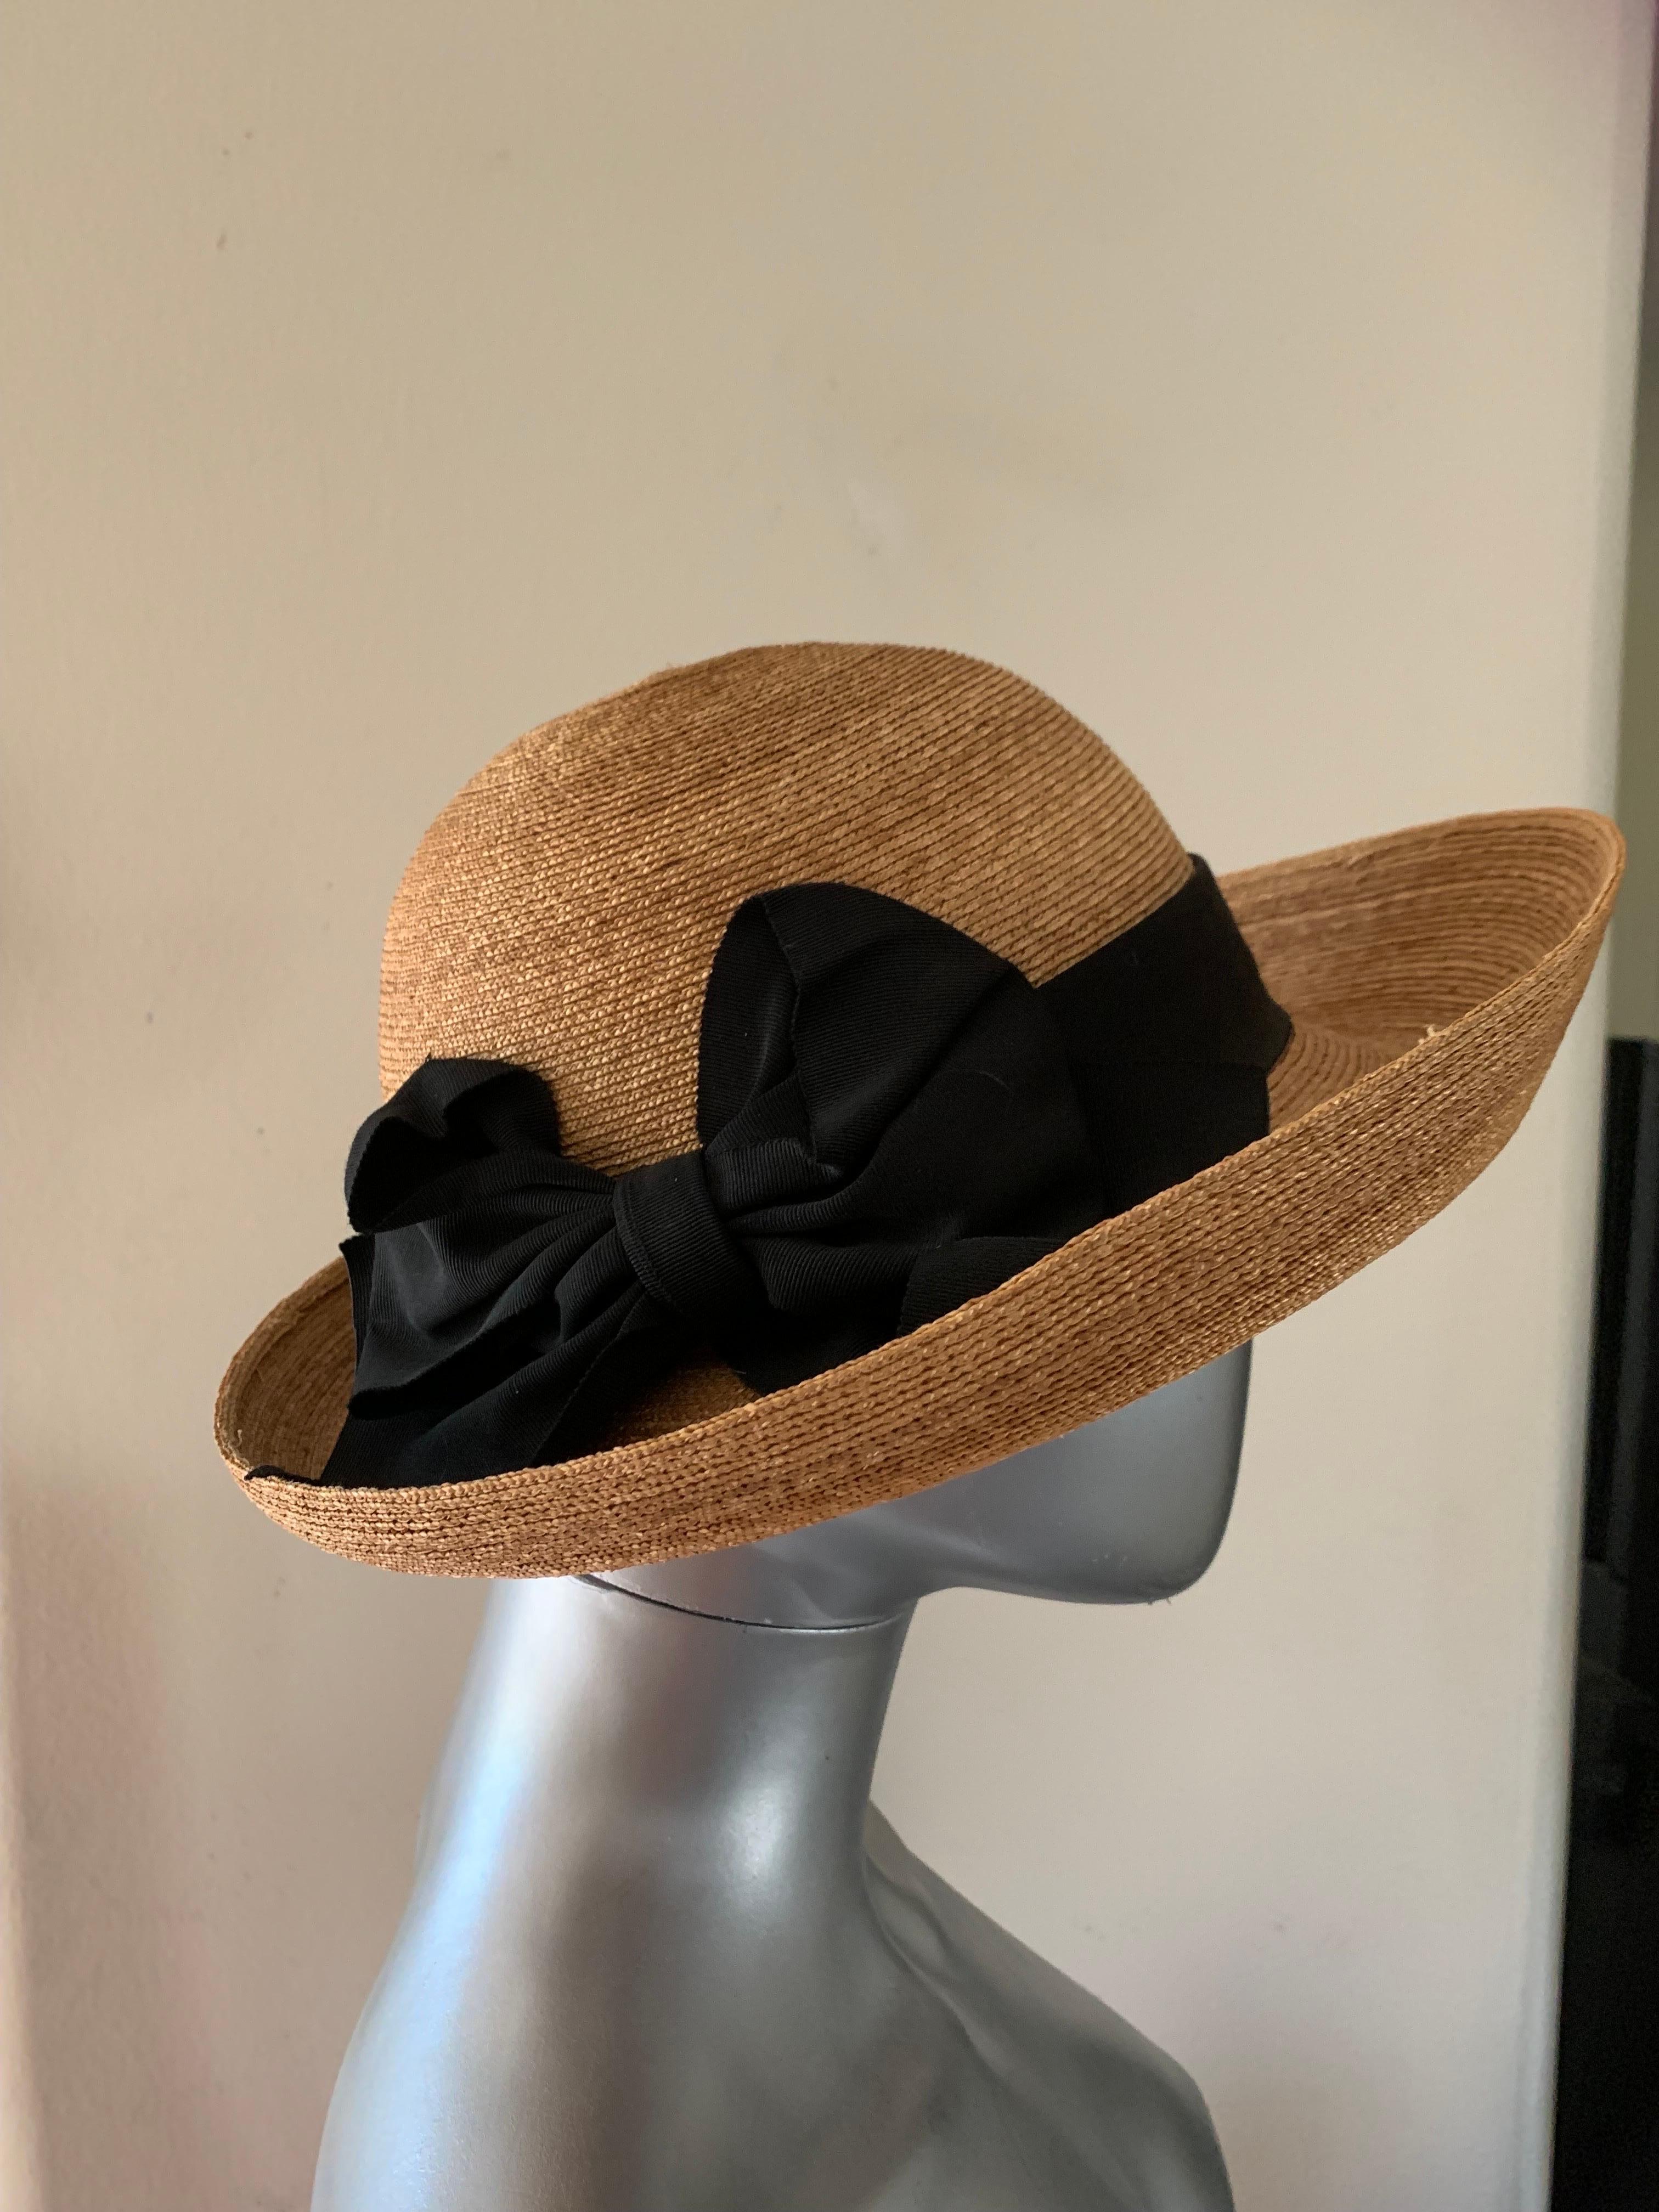 Tracey Tooker Straw Boater Hat with Black Grosgrain Bow NWOT For Sale 3